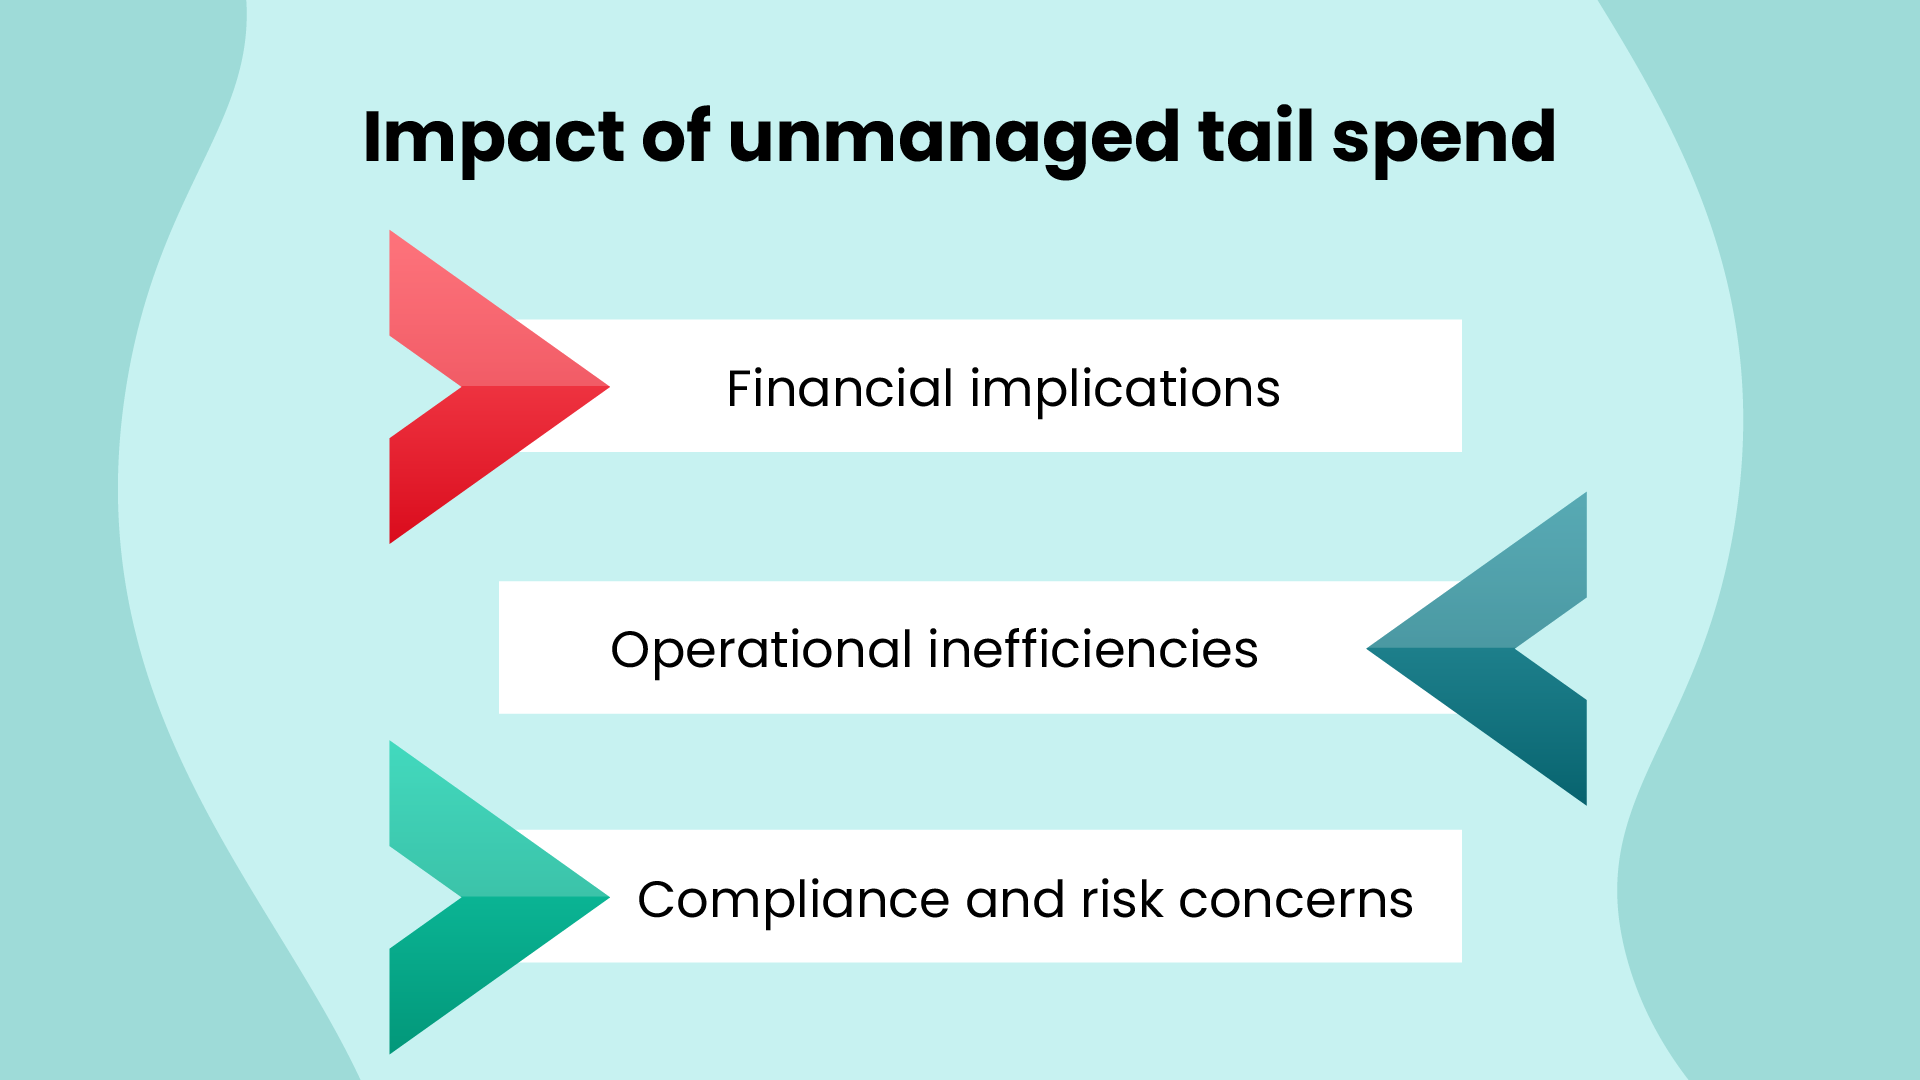 Impact of unmanaged tail spend